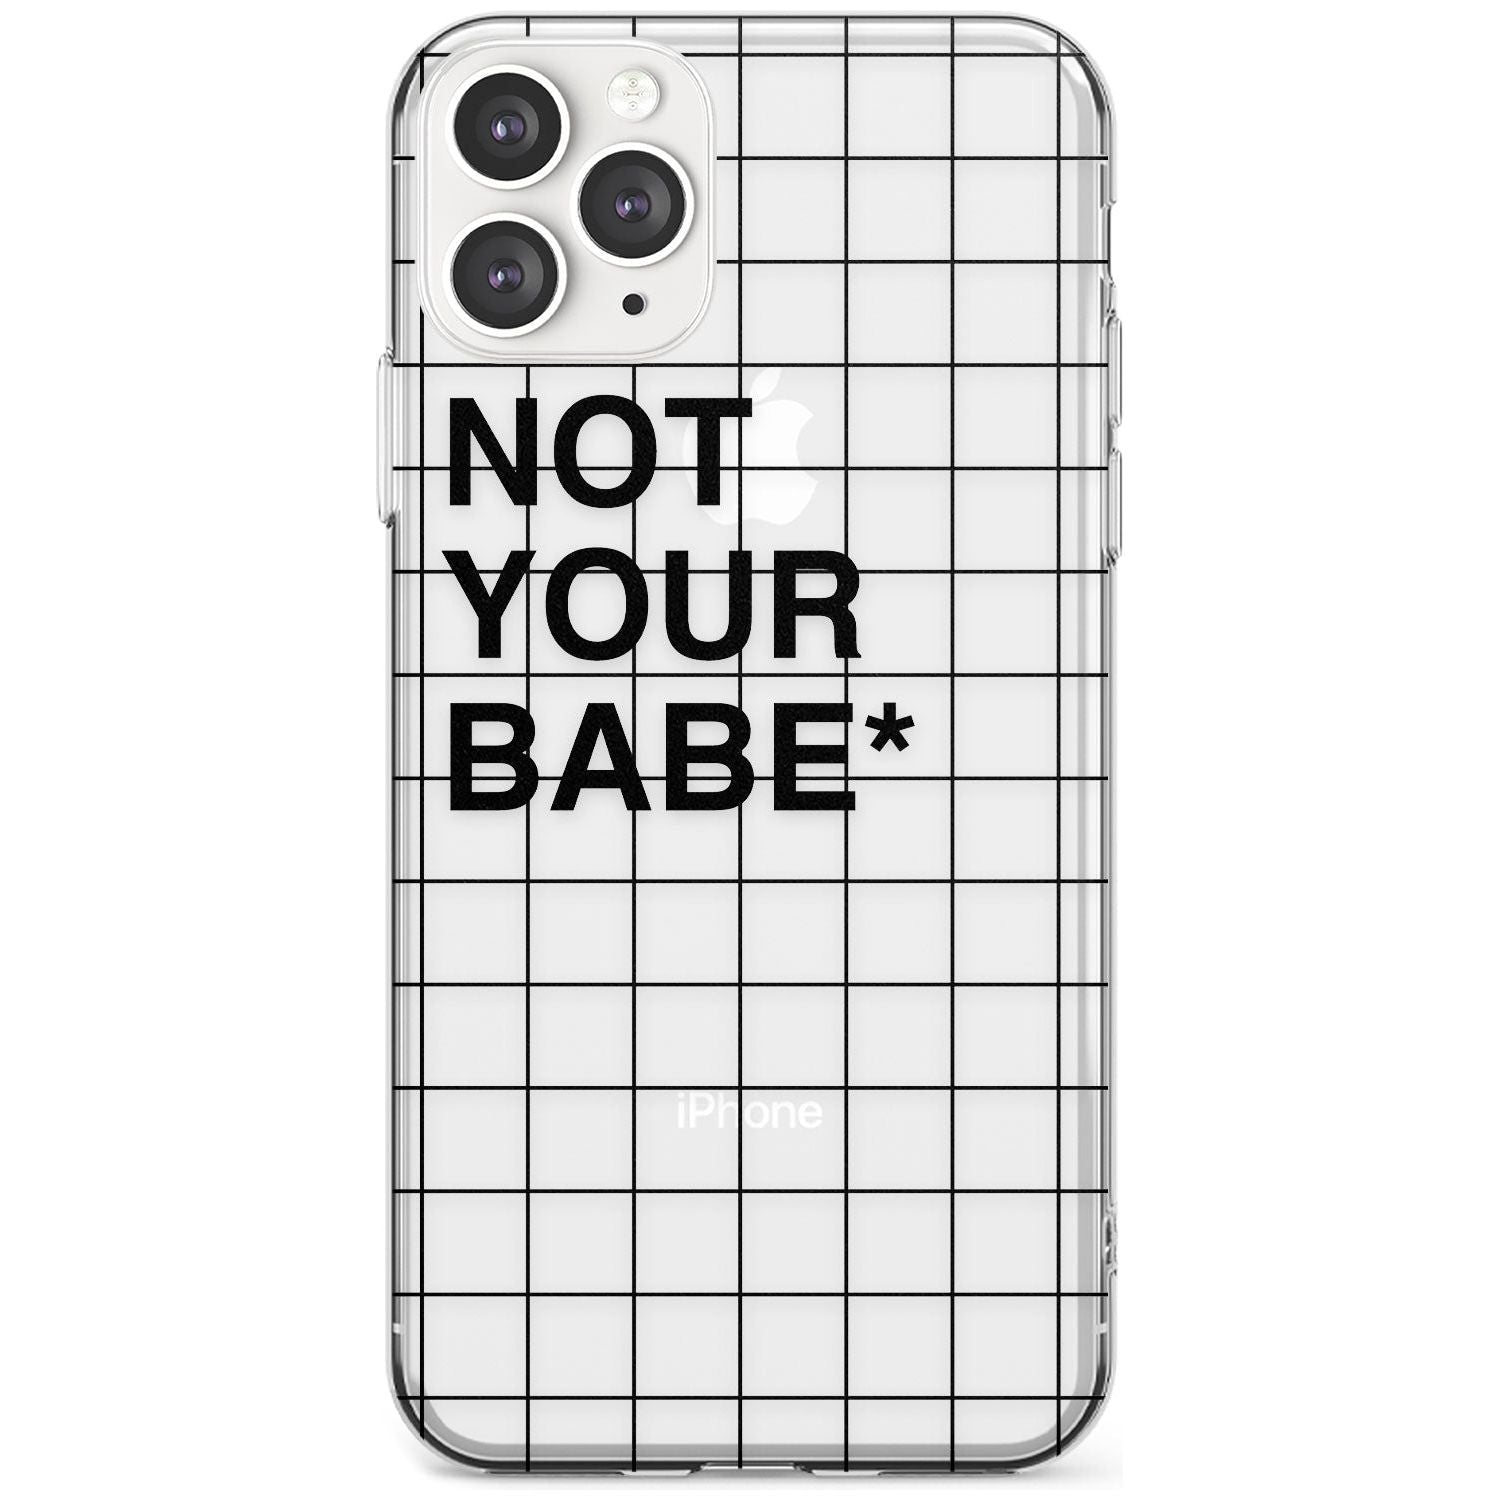 Grid Pattern Not Your Babe Slim TPU Phone Case for iPhone 11 Pro Max